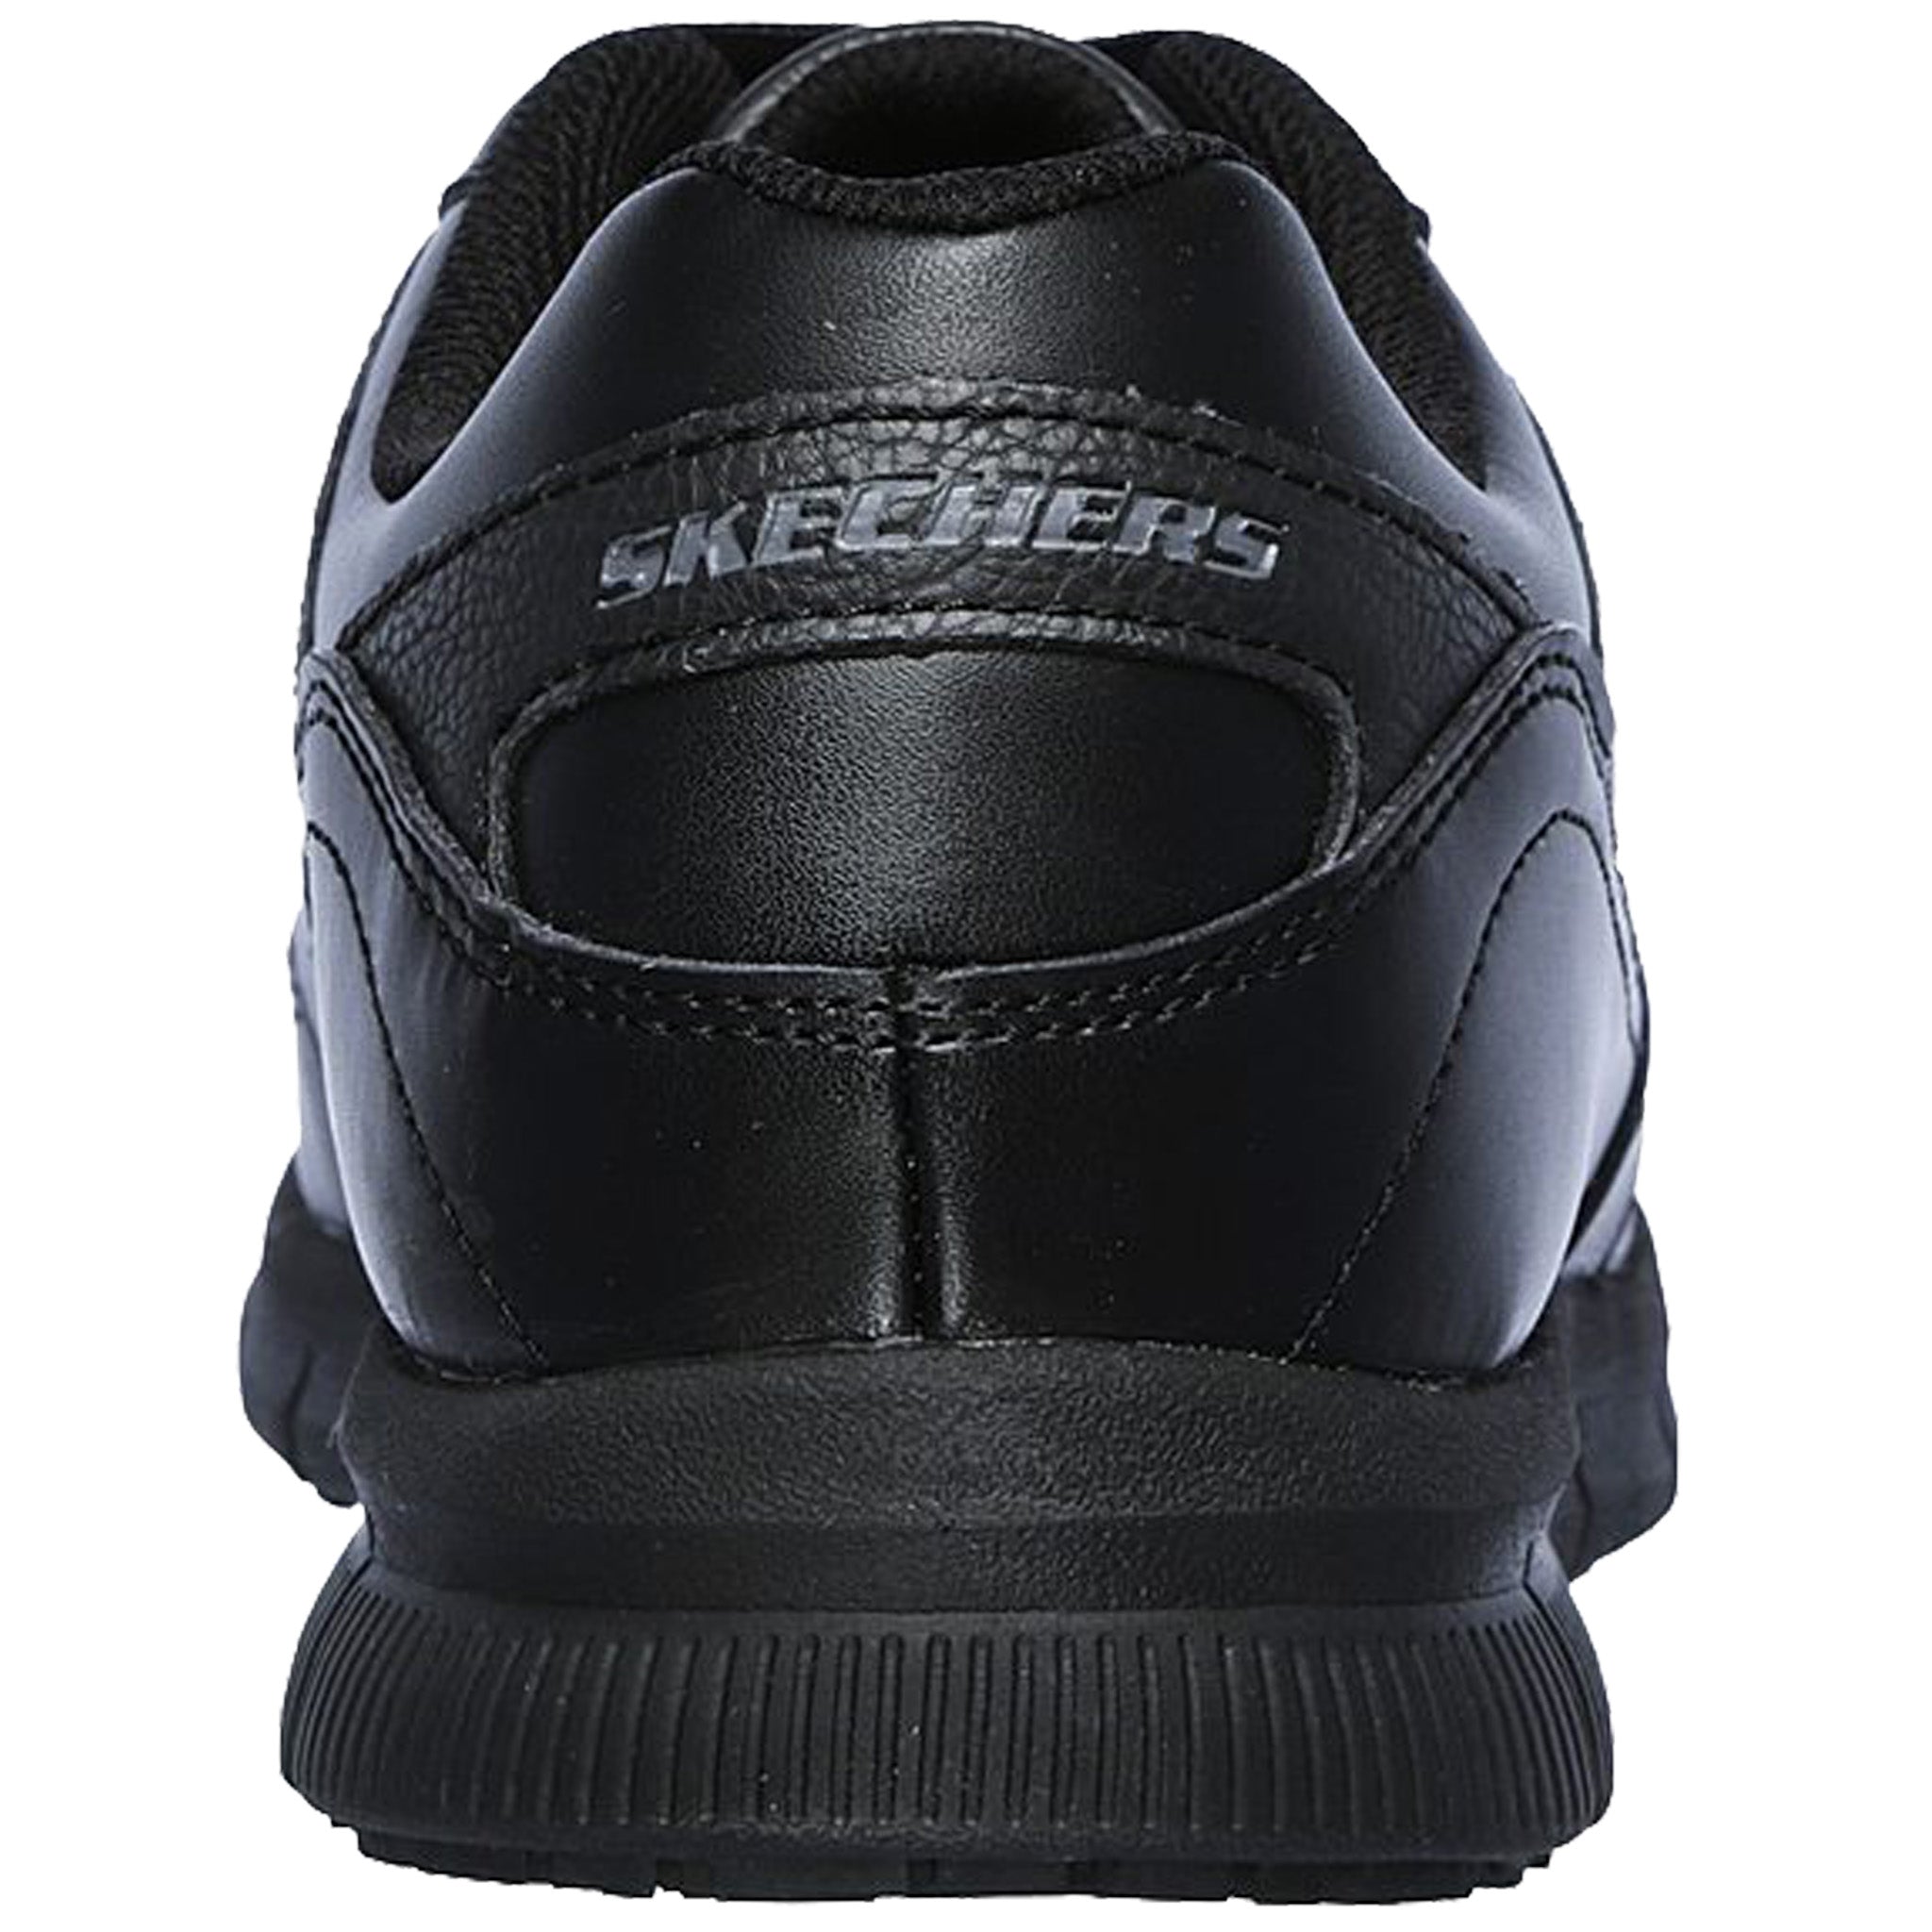 Skechers 77156 Nampa Memory Foam Slip Resistant Work Shoes That Shoe Store and More